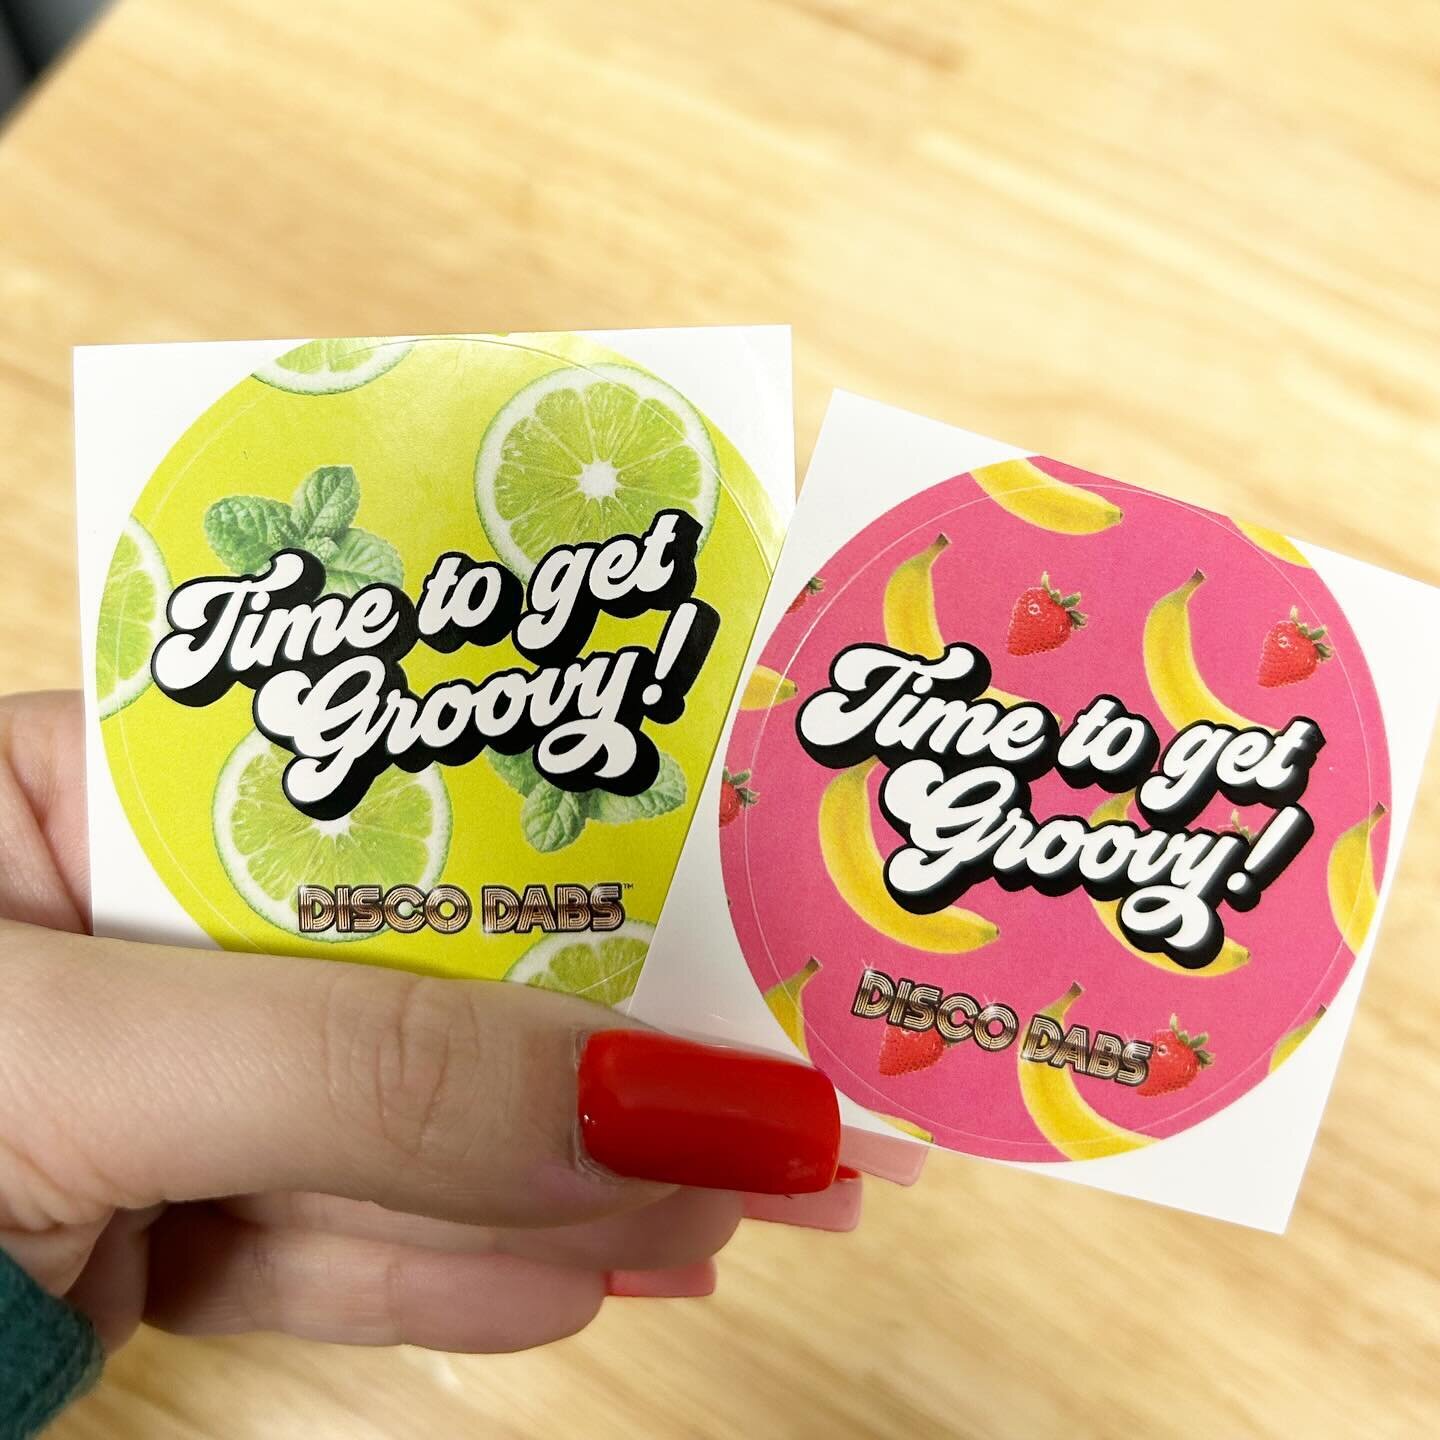 Have you tried our Disco Flavors flavored carts? They currently come in 3 flavors: Apple Blast, Mojito, &amp; Strawberry Banana🍏🍋🍓

What flavors do you want to see next? 
.
.
.
.
#discoflavors #stickers #discodabs #flavoredcart #mojito #appleblast